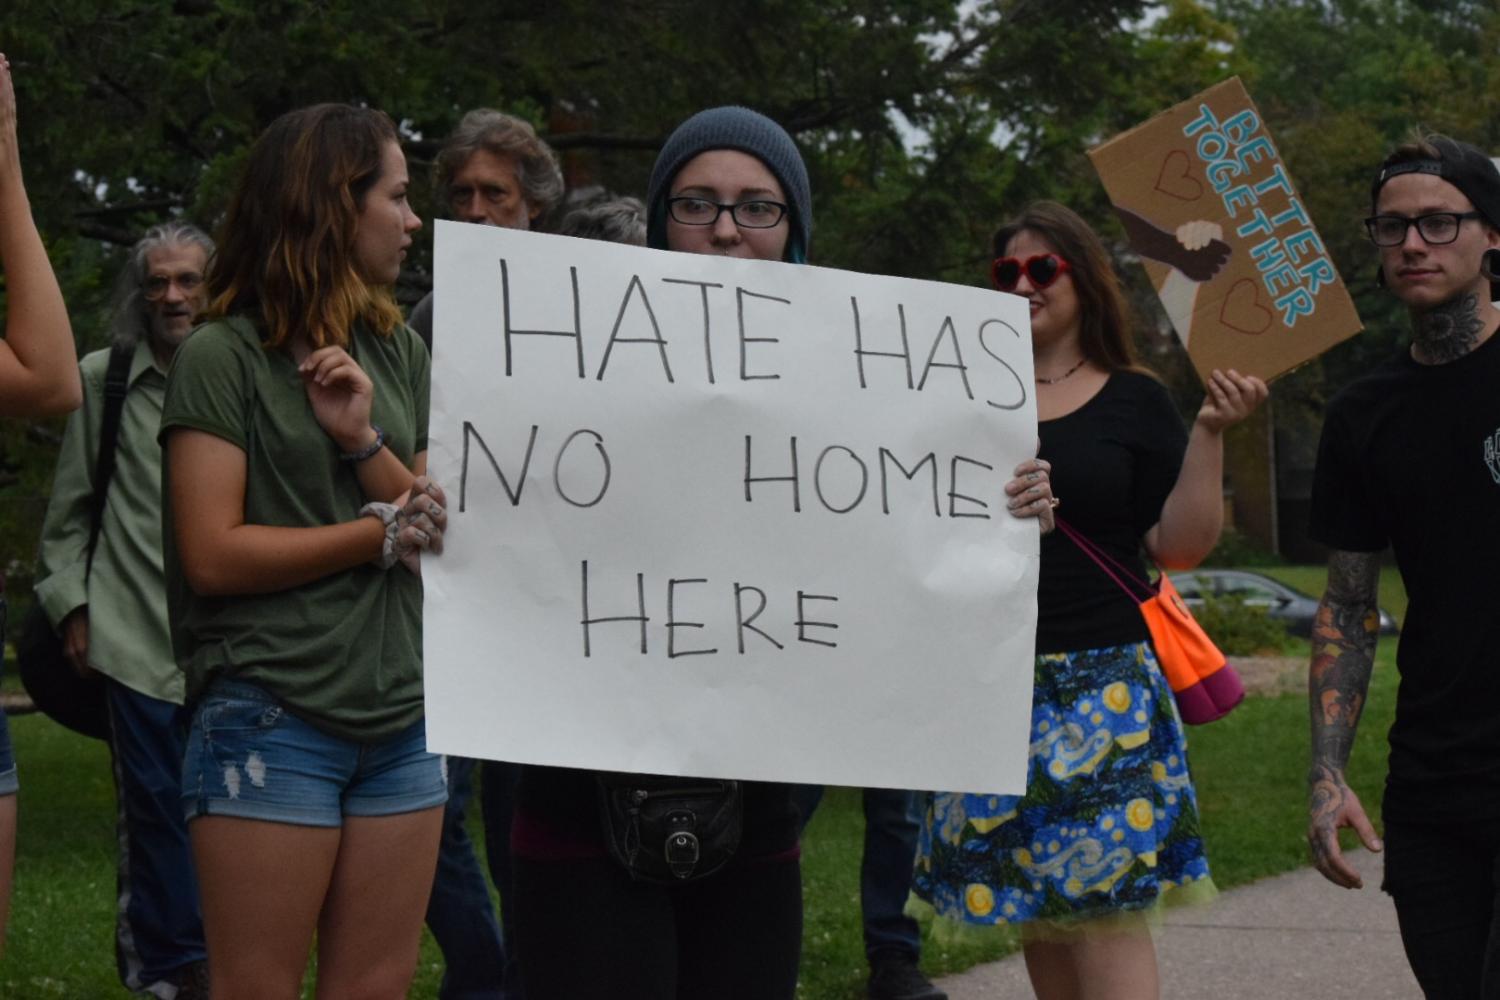 Protestors show their opinion on hate speech at the Quad Cities No Hate rally.